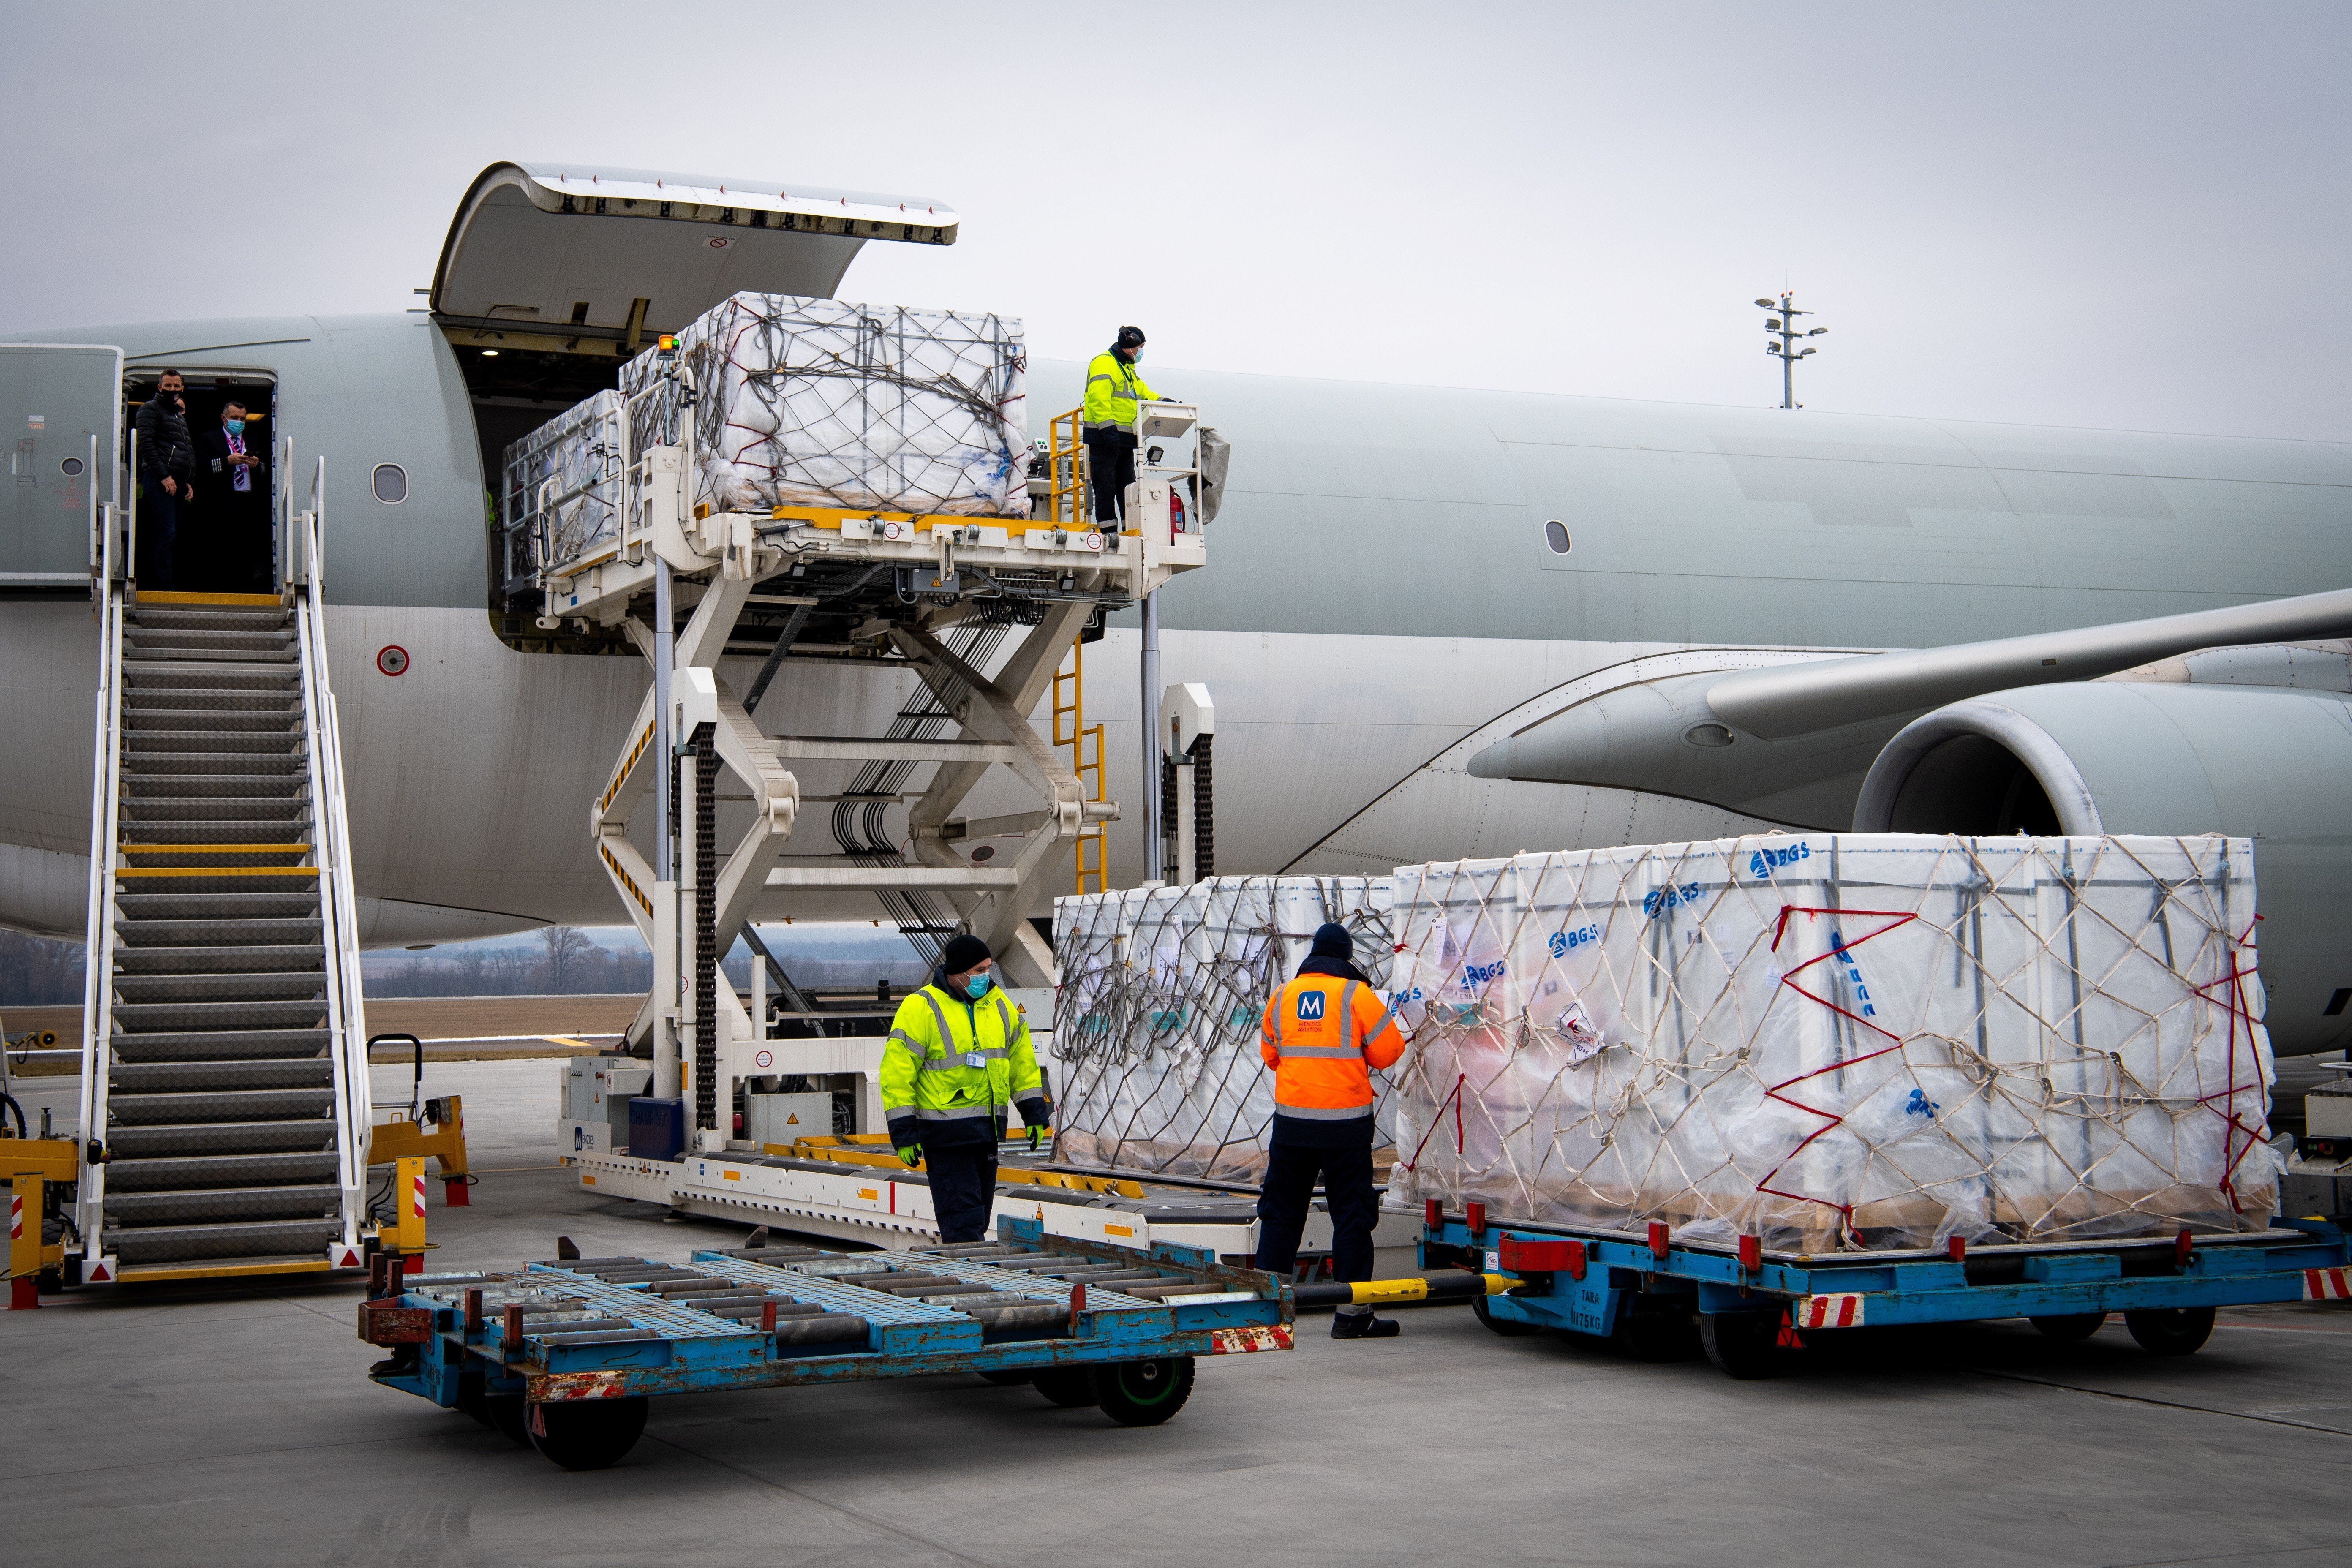 Workers unload a shipment of China’s Sinopharm Covid-19 vaccine as it arrives at Budapest Airport on February 16. Photo: Handout via Reuters